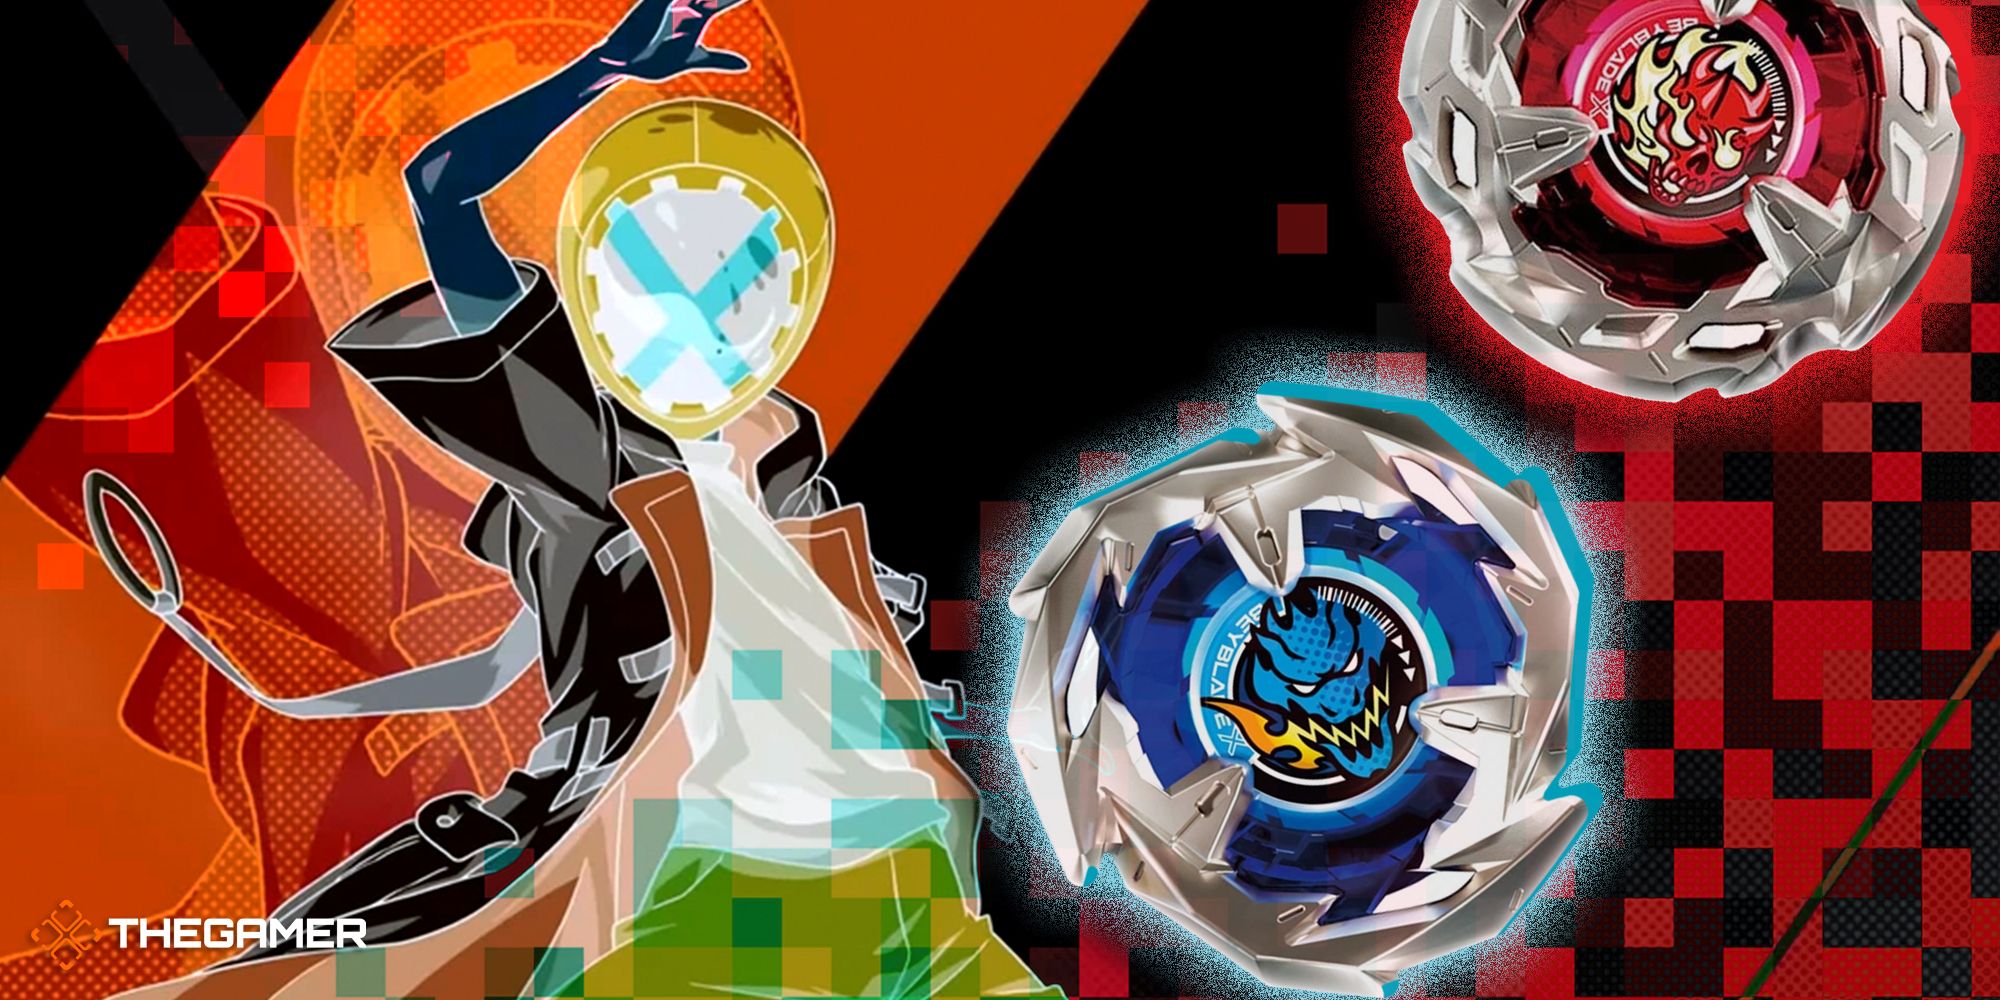 I'm Obsessed With These New Beyblades That Are Definitely Going To Kill  Someone